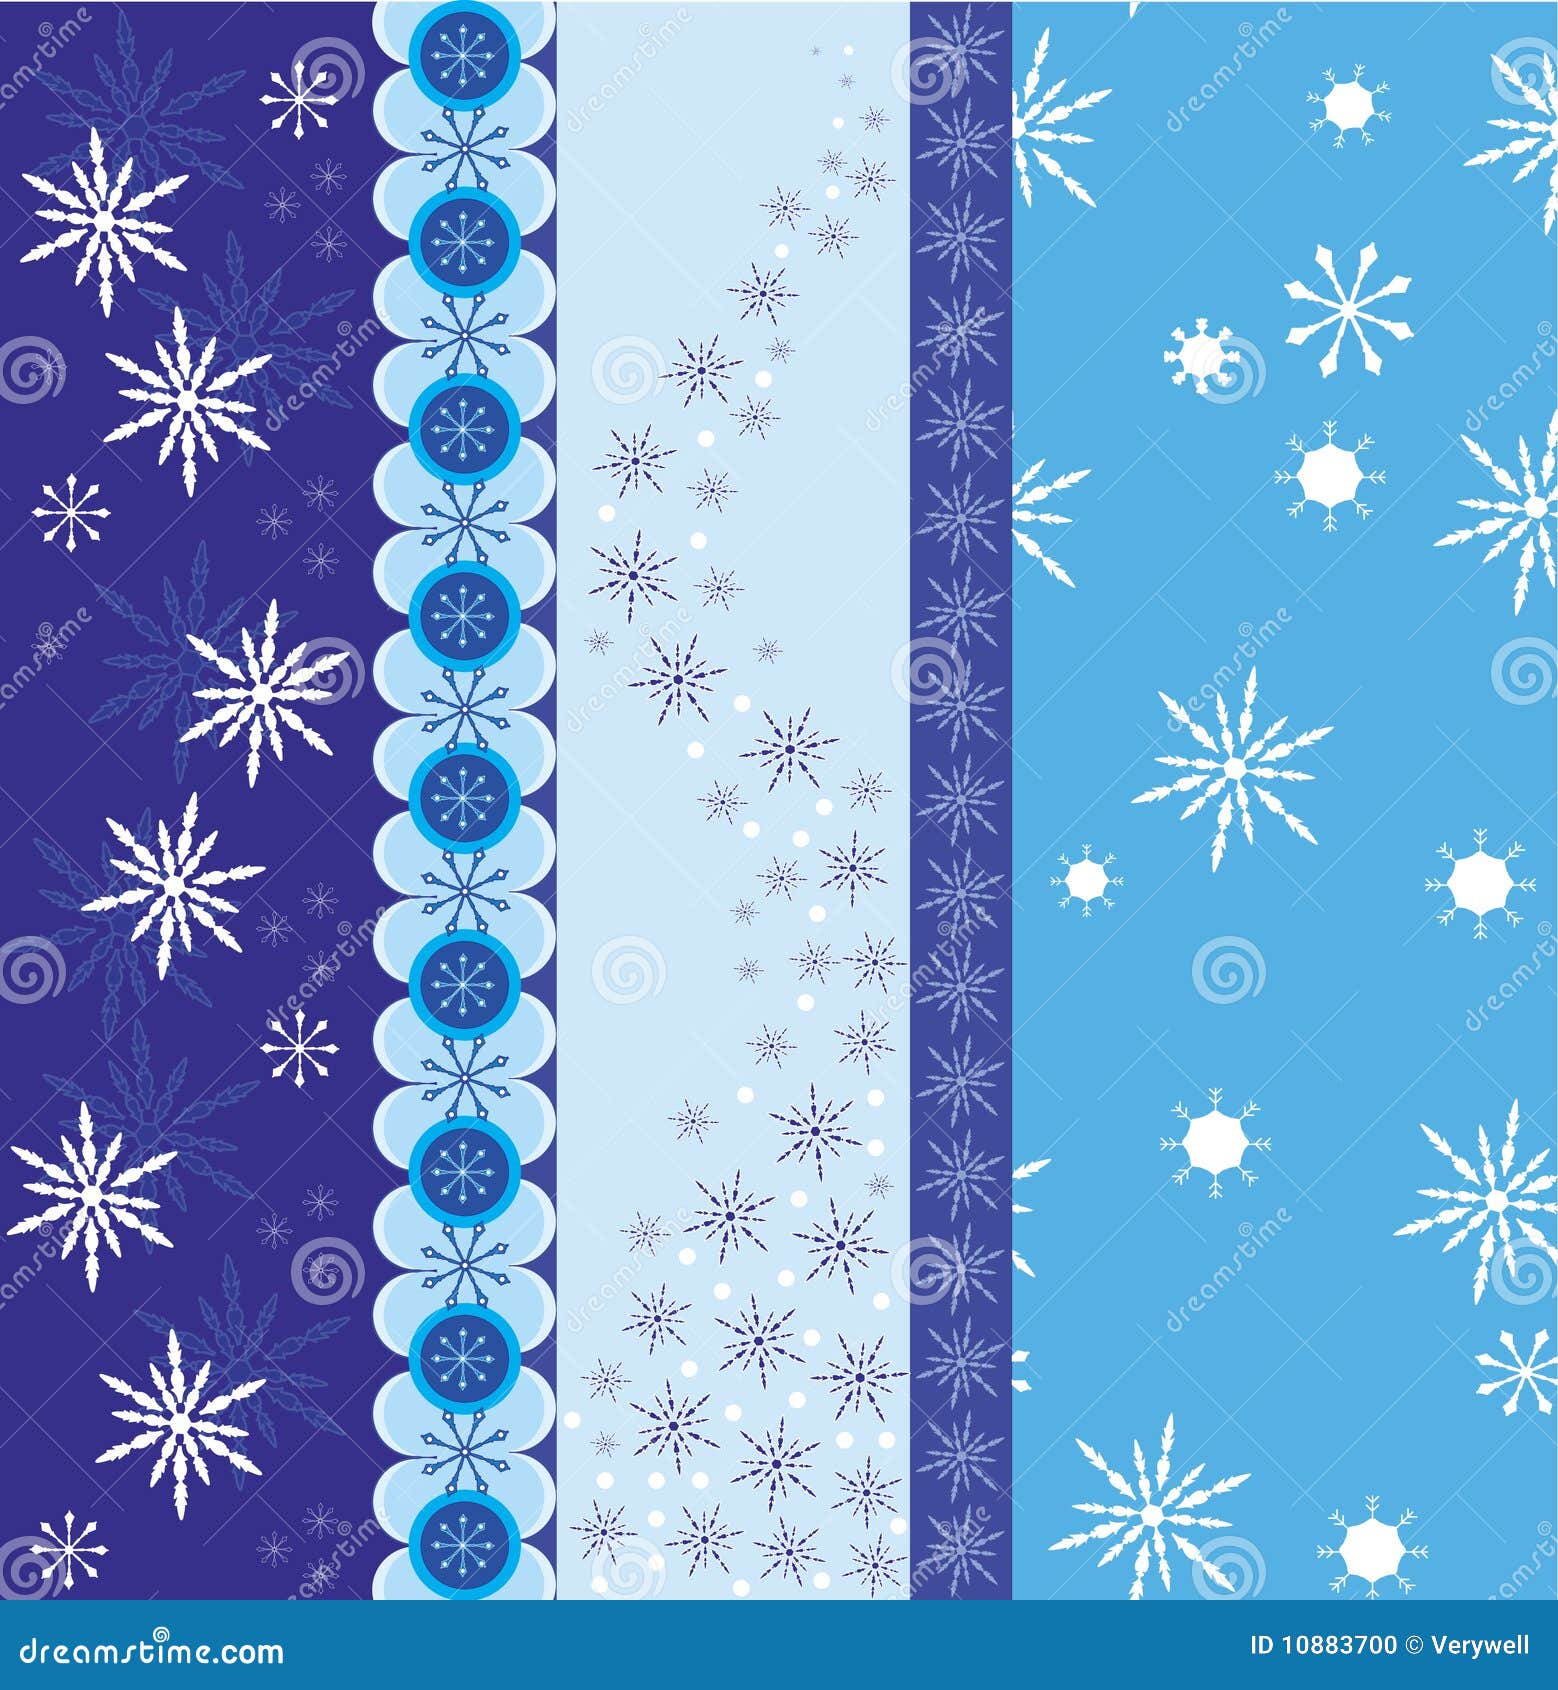 Download Snowflake border vector stock vector. Illustration of year ...